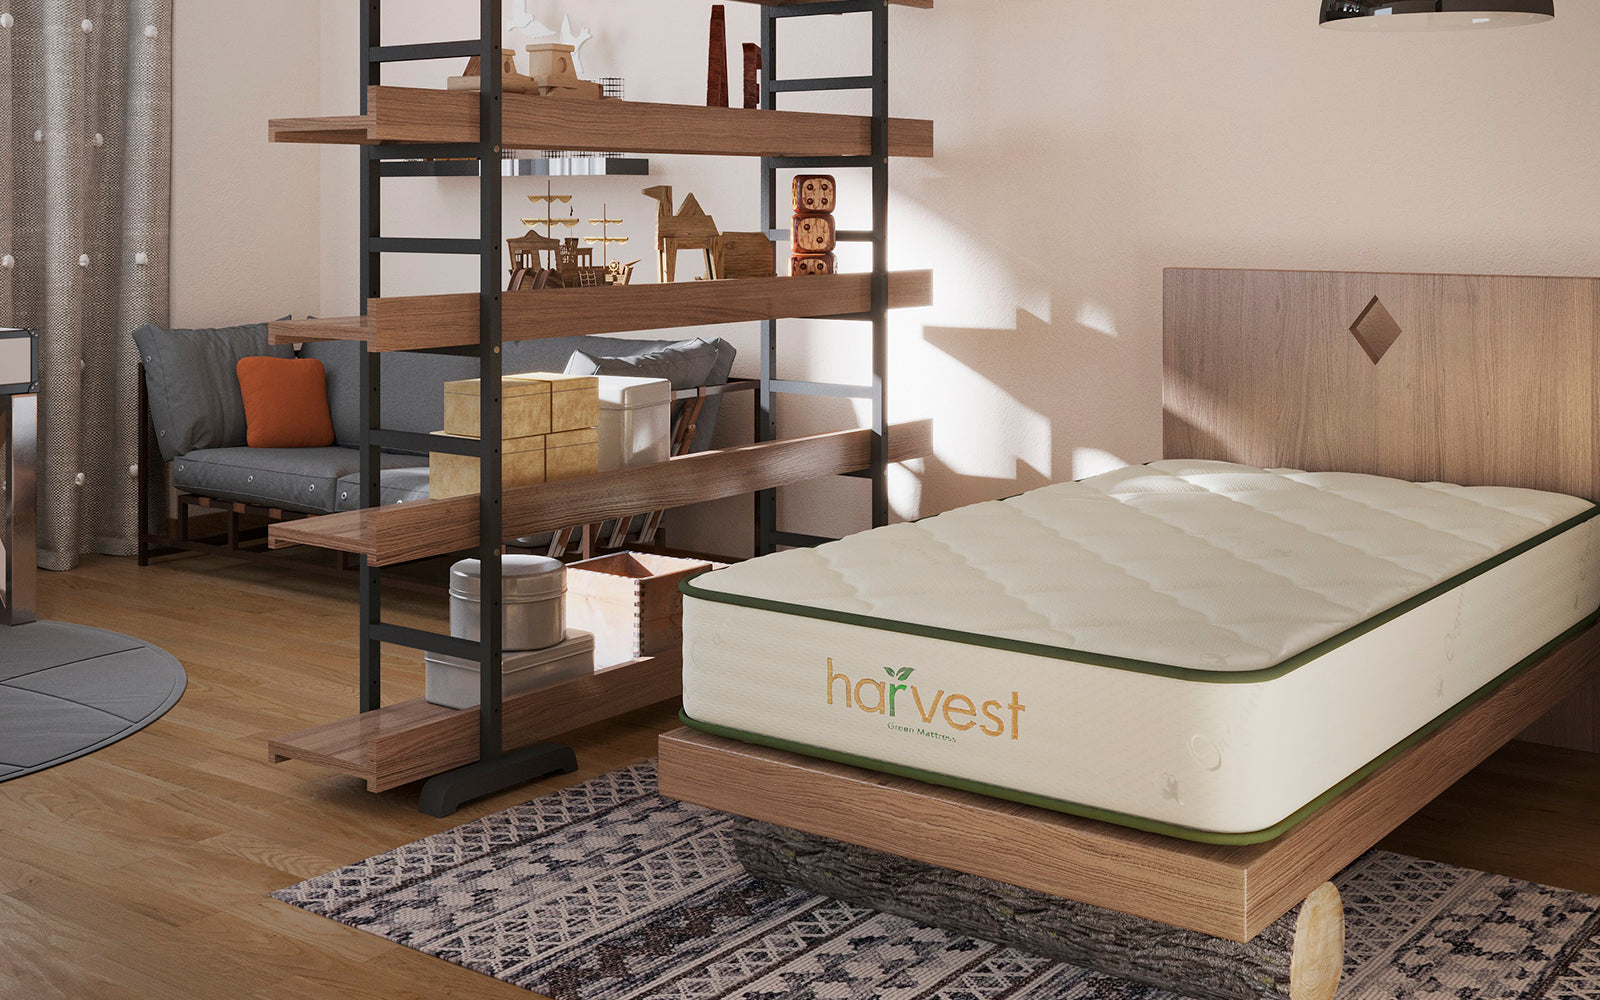 image of our harvest green essentials mattress in a kids bedroom scene.